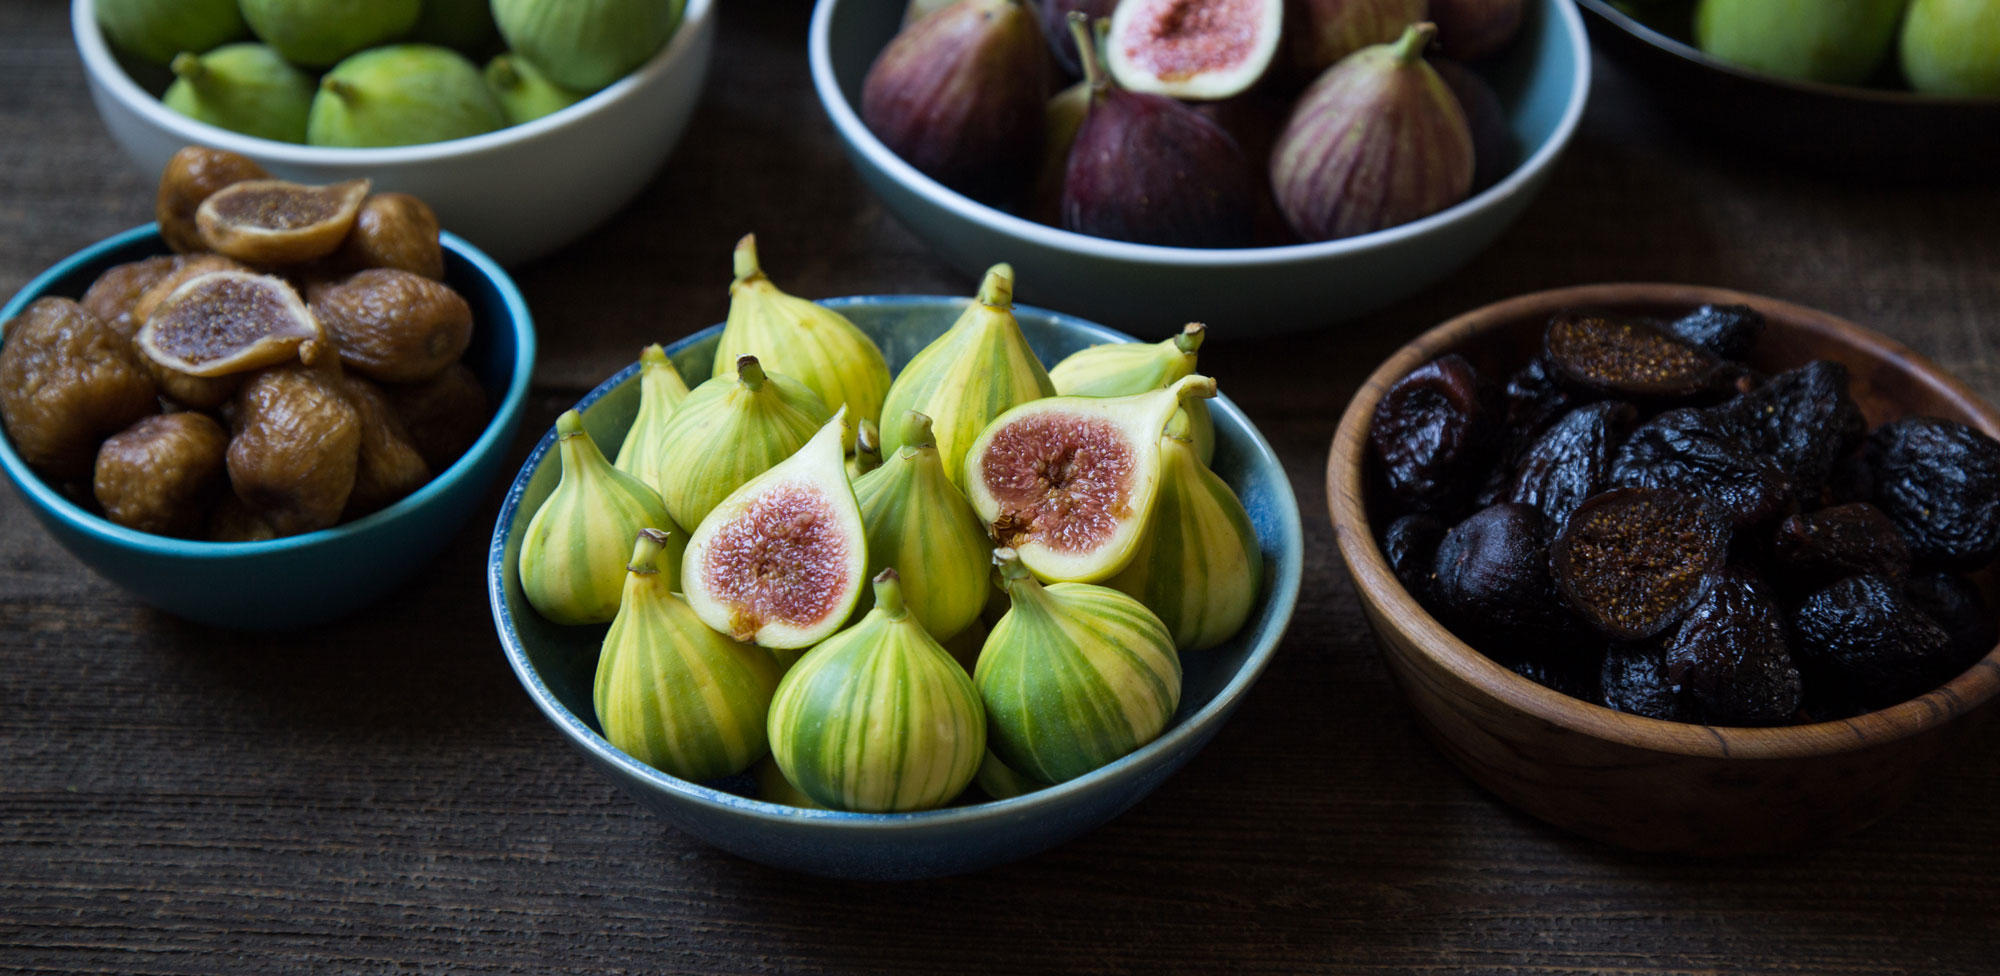 California Figs Celebrating The Quality Of California Figs California Figs,Caramel Macchiato Starbucks Calories